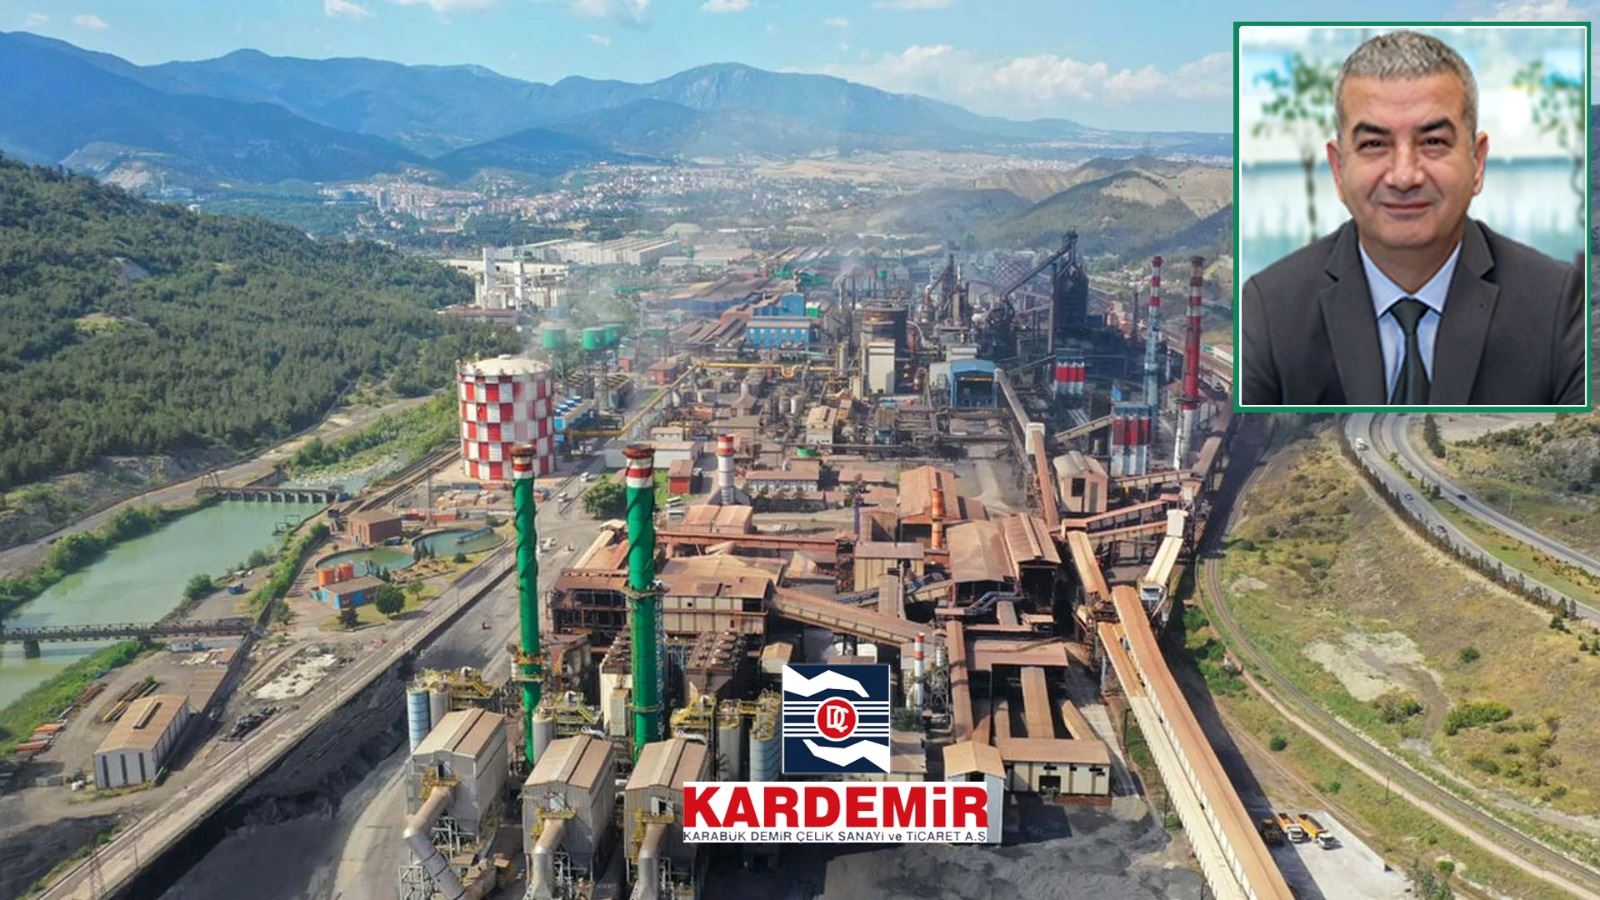 Kardemir general manager is leaving his job